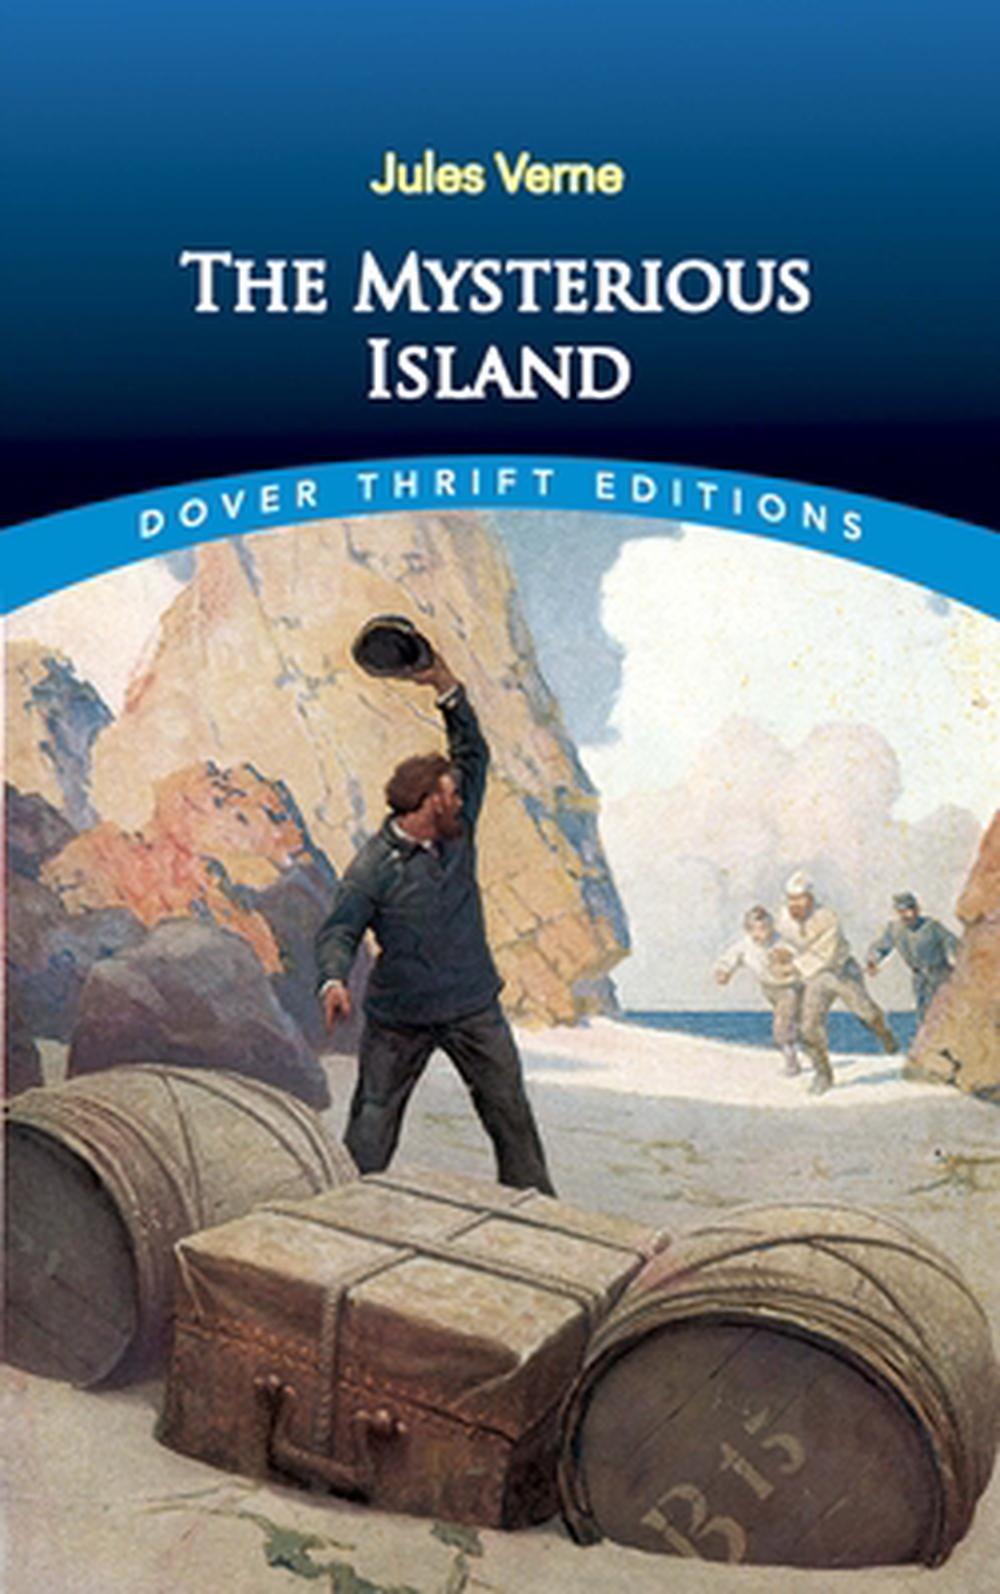 the mysterious island book by jules verne